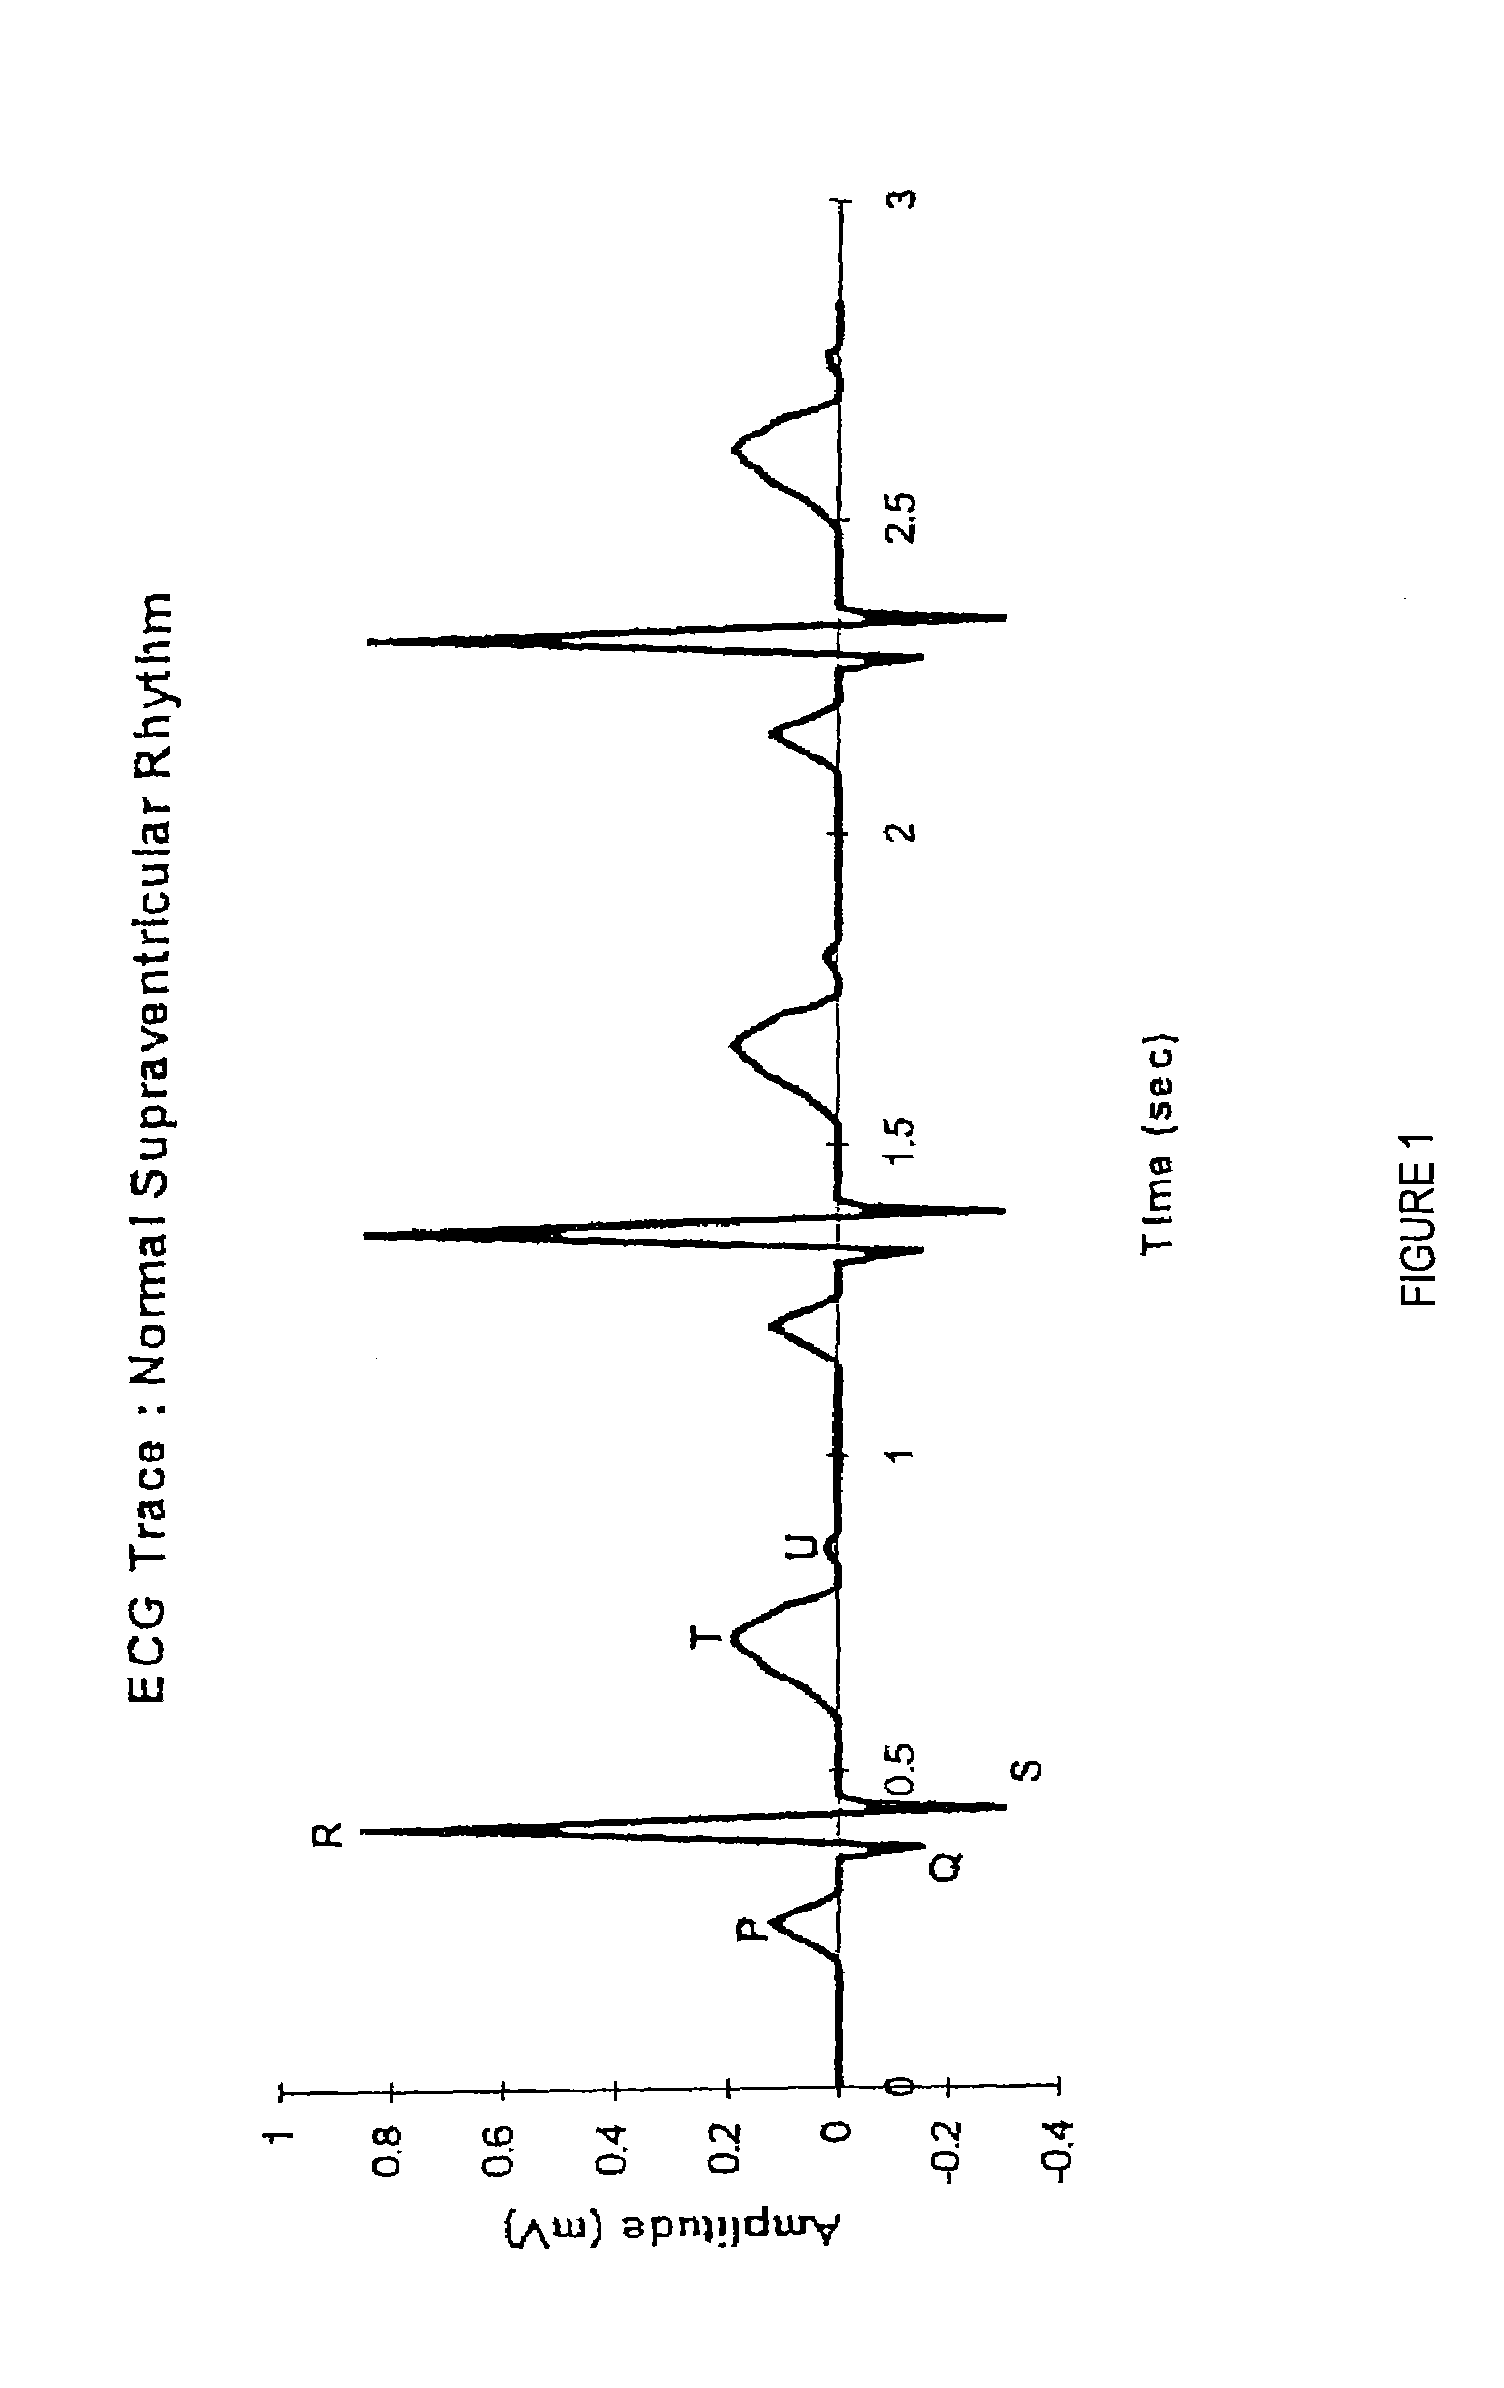 Method and system for processing electrocardial signals